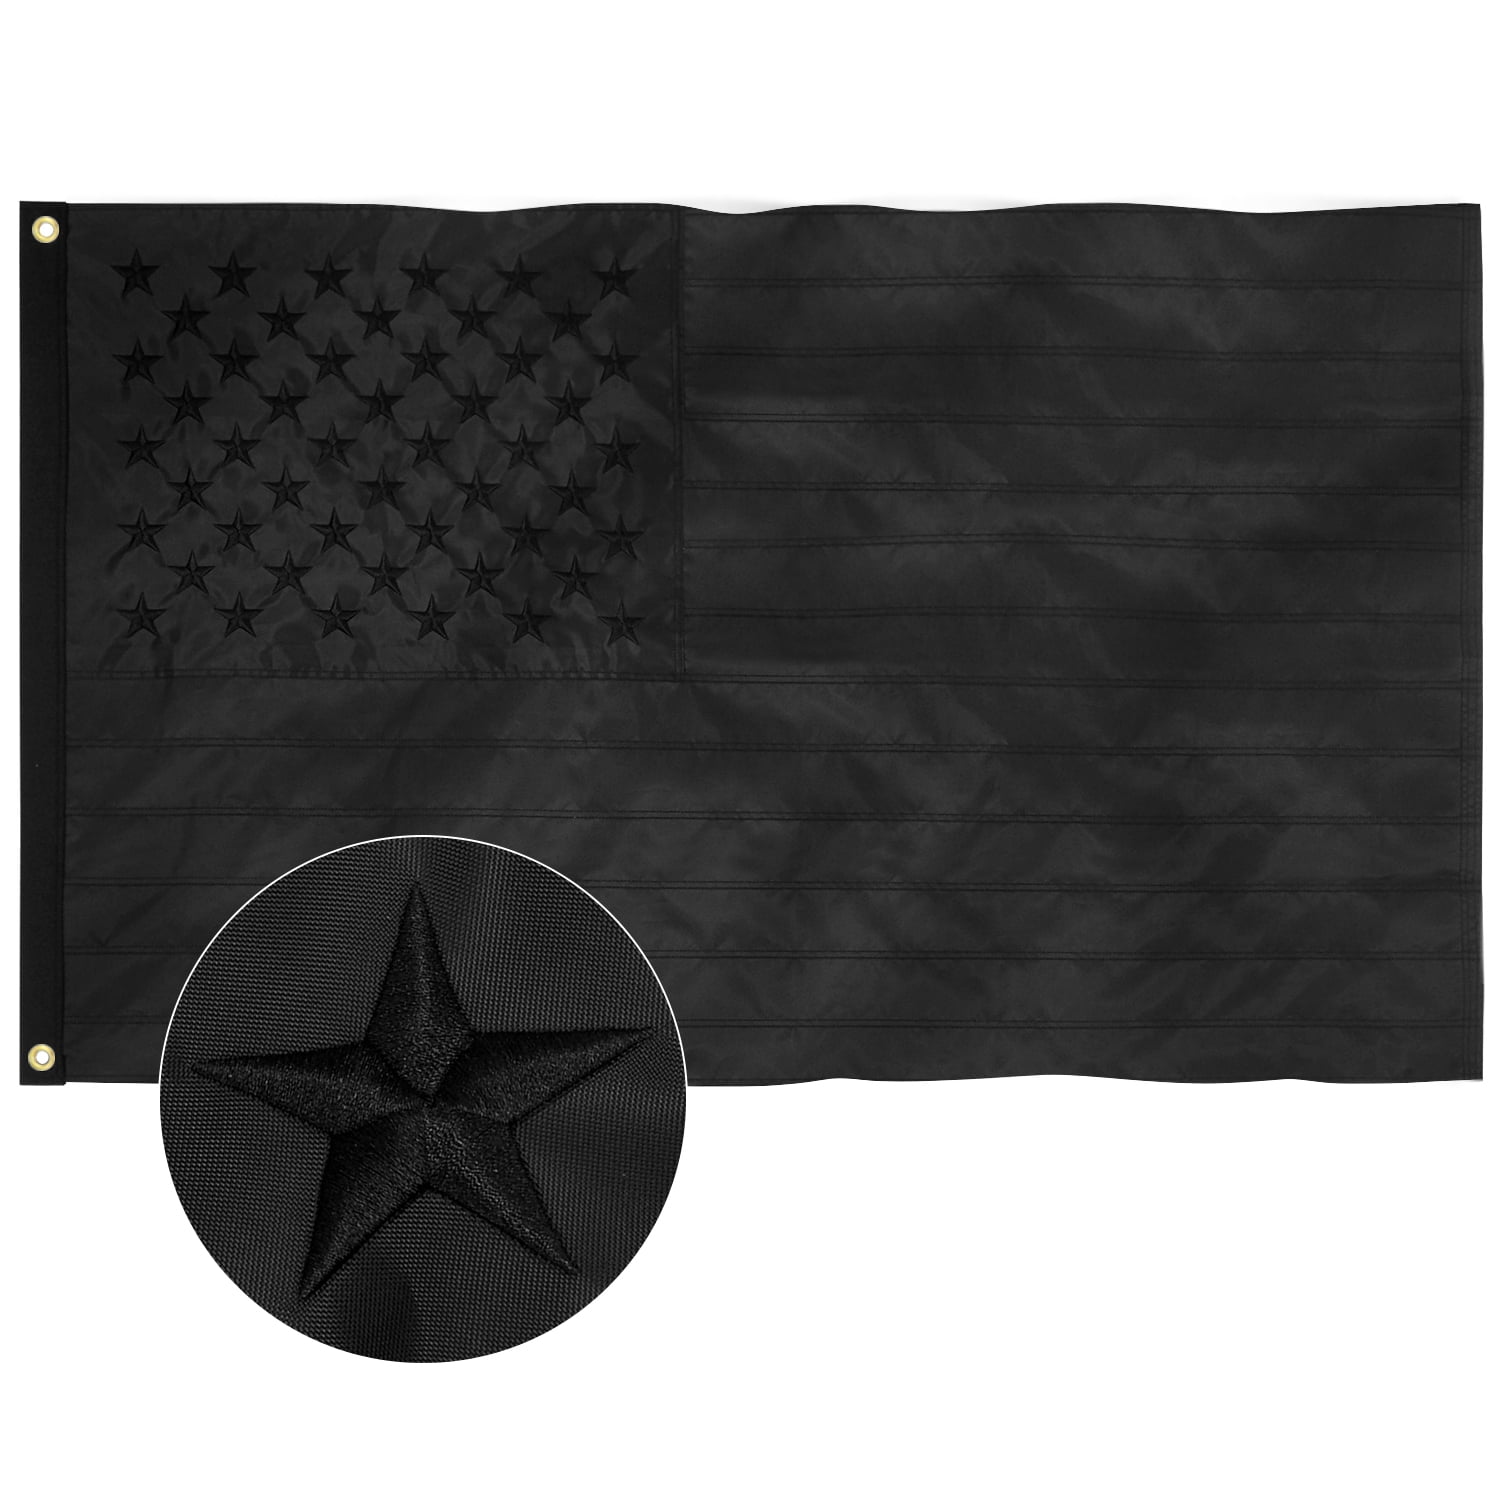 All Black American Flag Embroidered US USA Flag Heavy Duty Made from Nylon Stars 